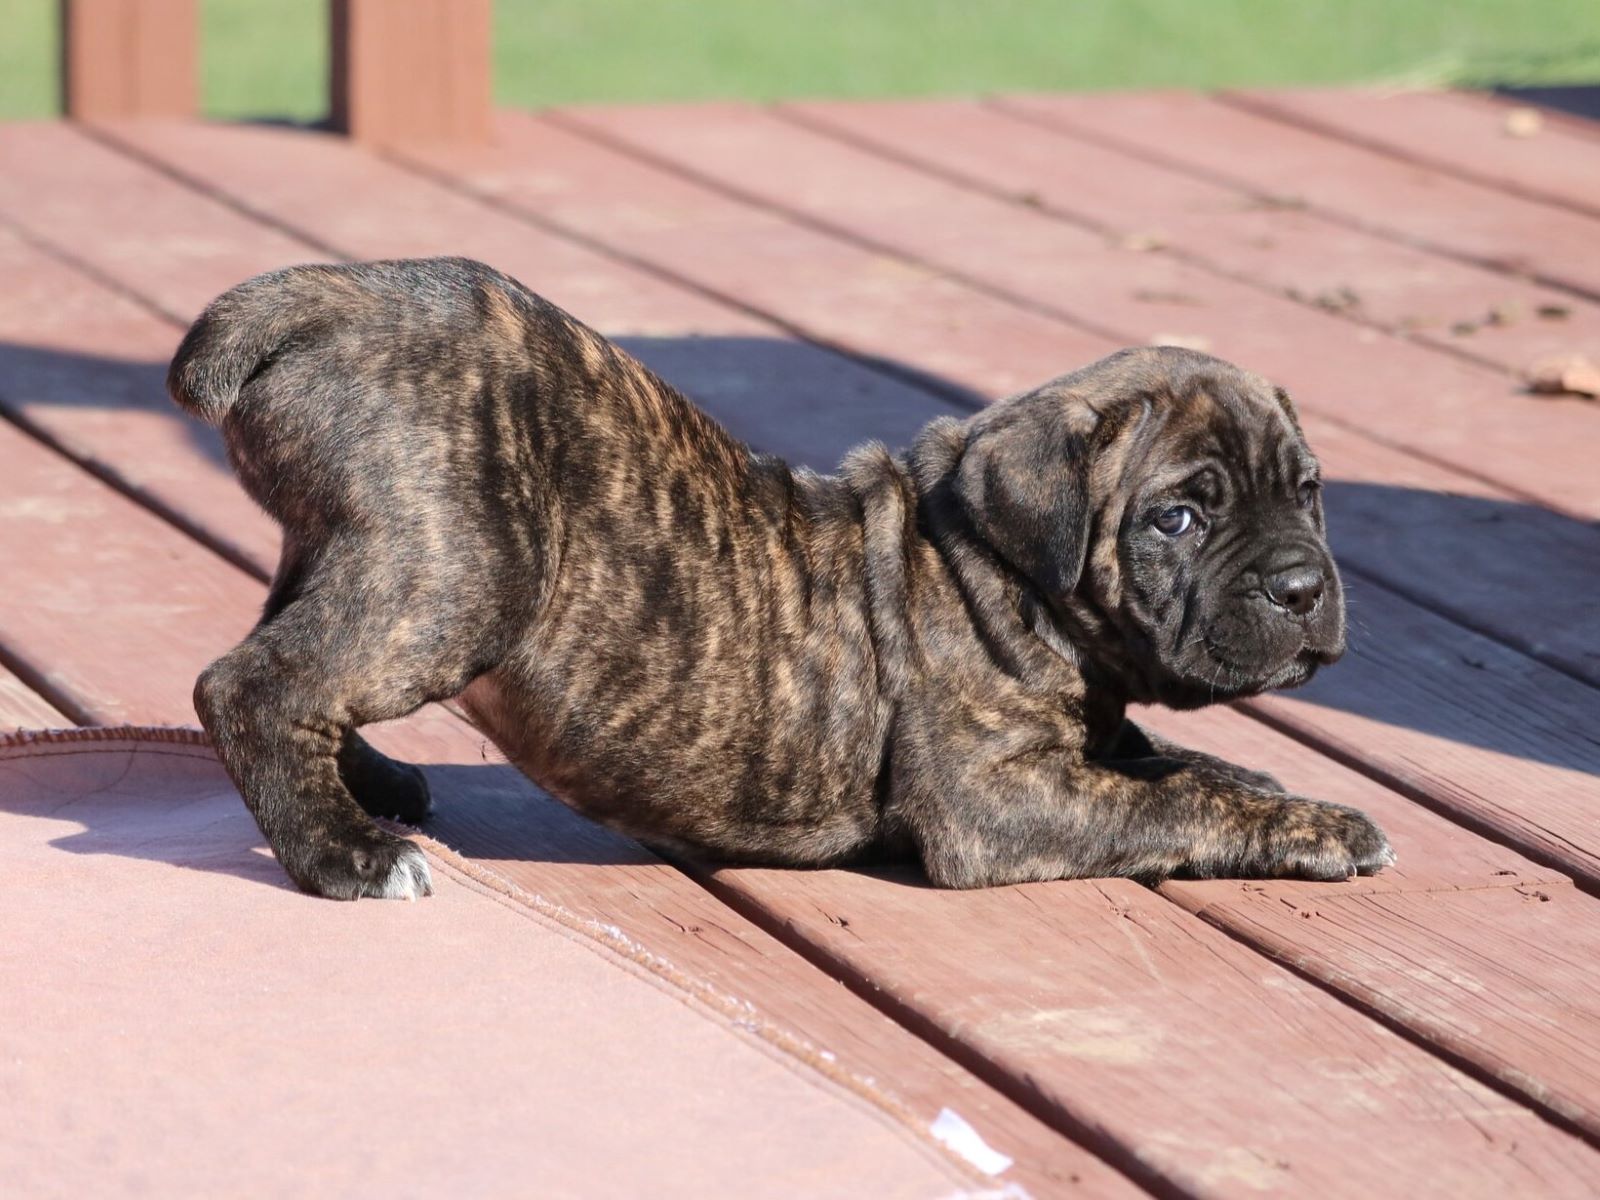 Unbelievable Price For A Cane Corso Puppy!